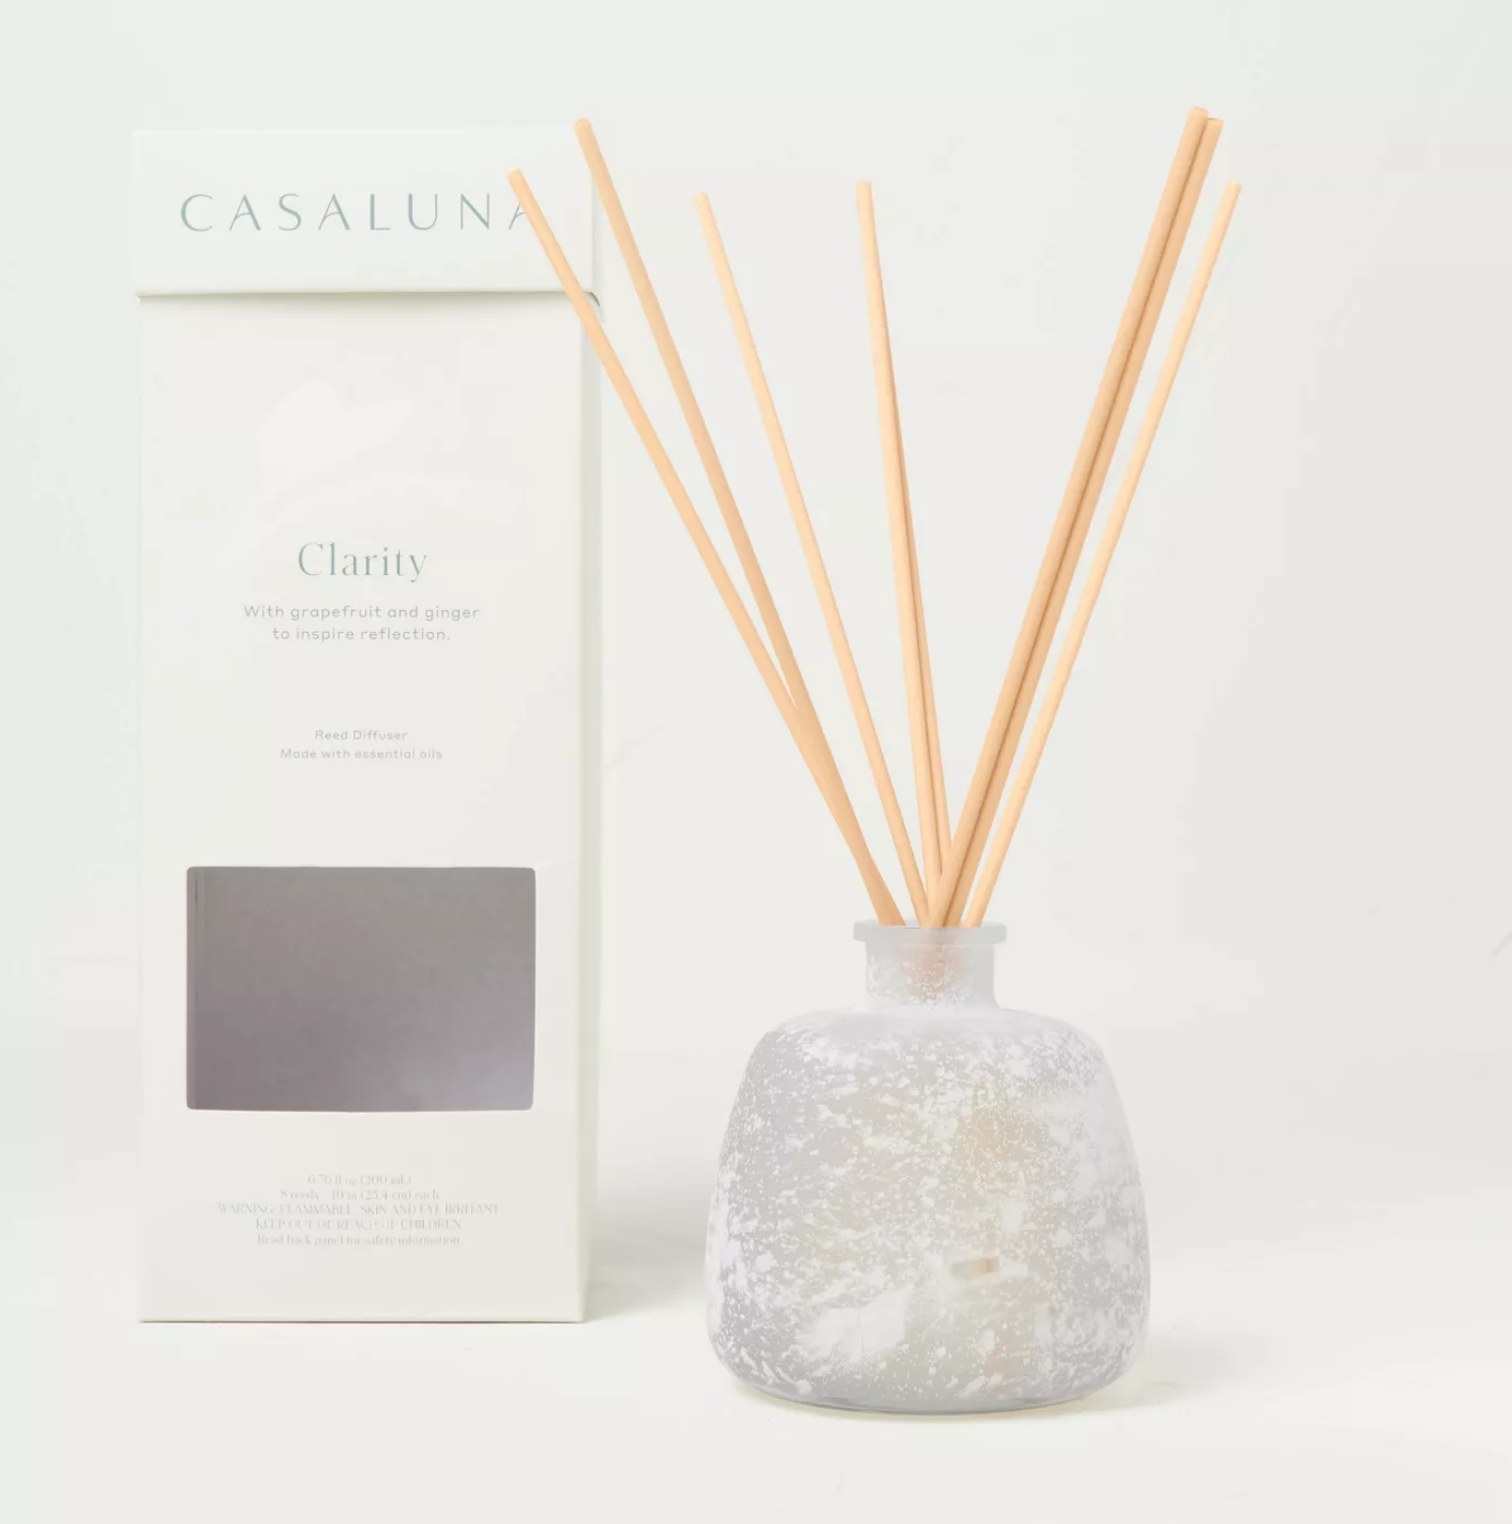 The diffuser in a speckled holder with light wood sticks